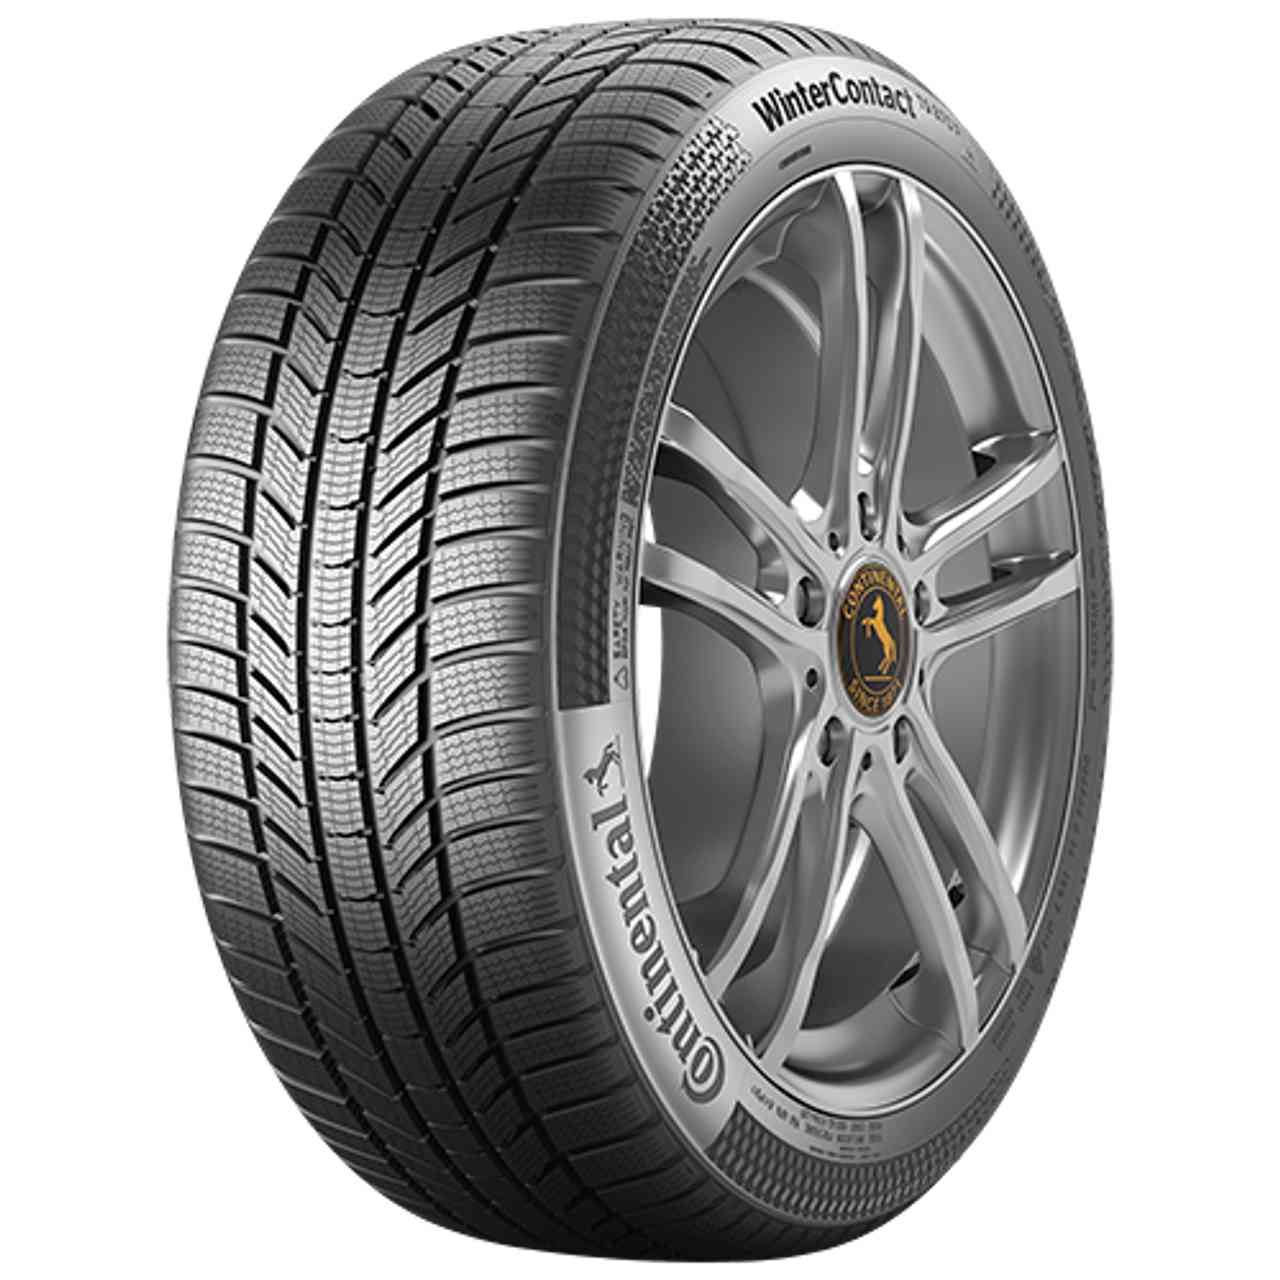 CONTINENTAL WINTERCONTACT TS 870 P (EVc) 255/40R19 100V FR BSW